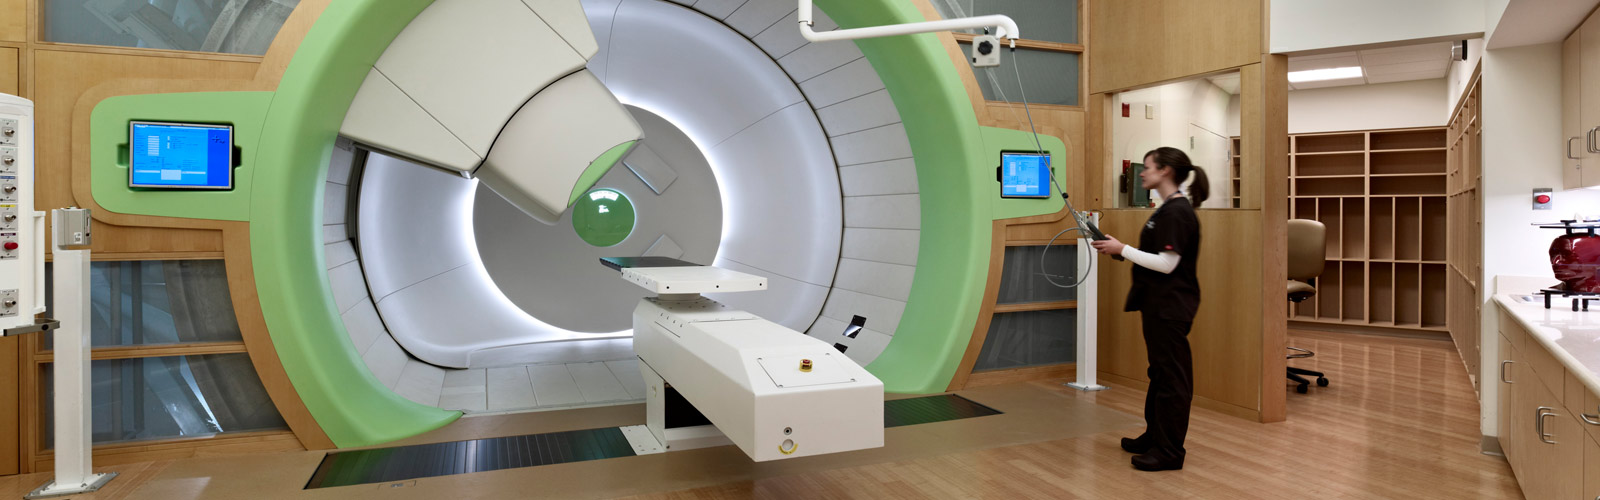 Image guided protontherapy: recent research and technological innovations to fight cancer